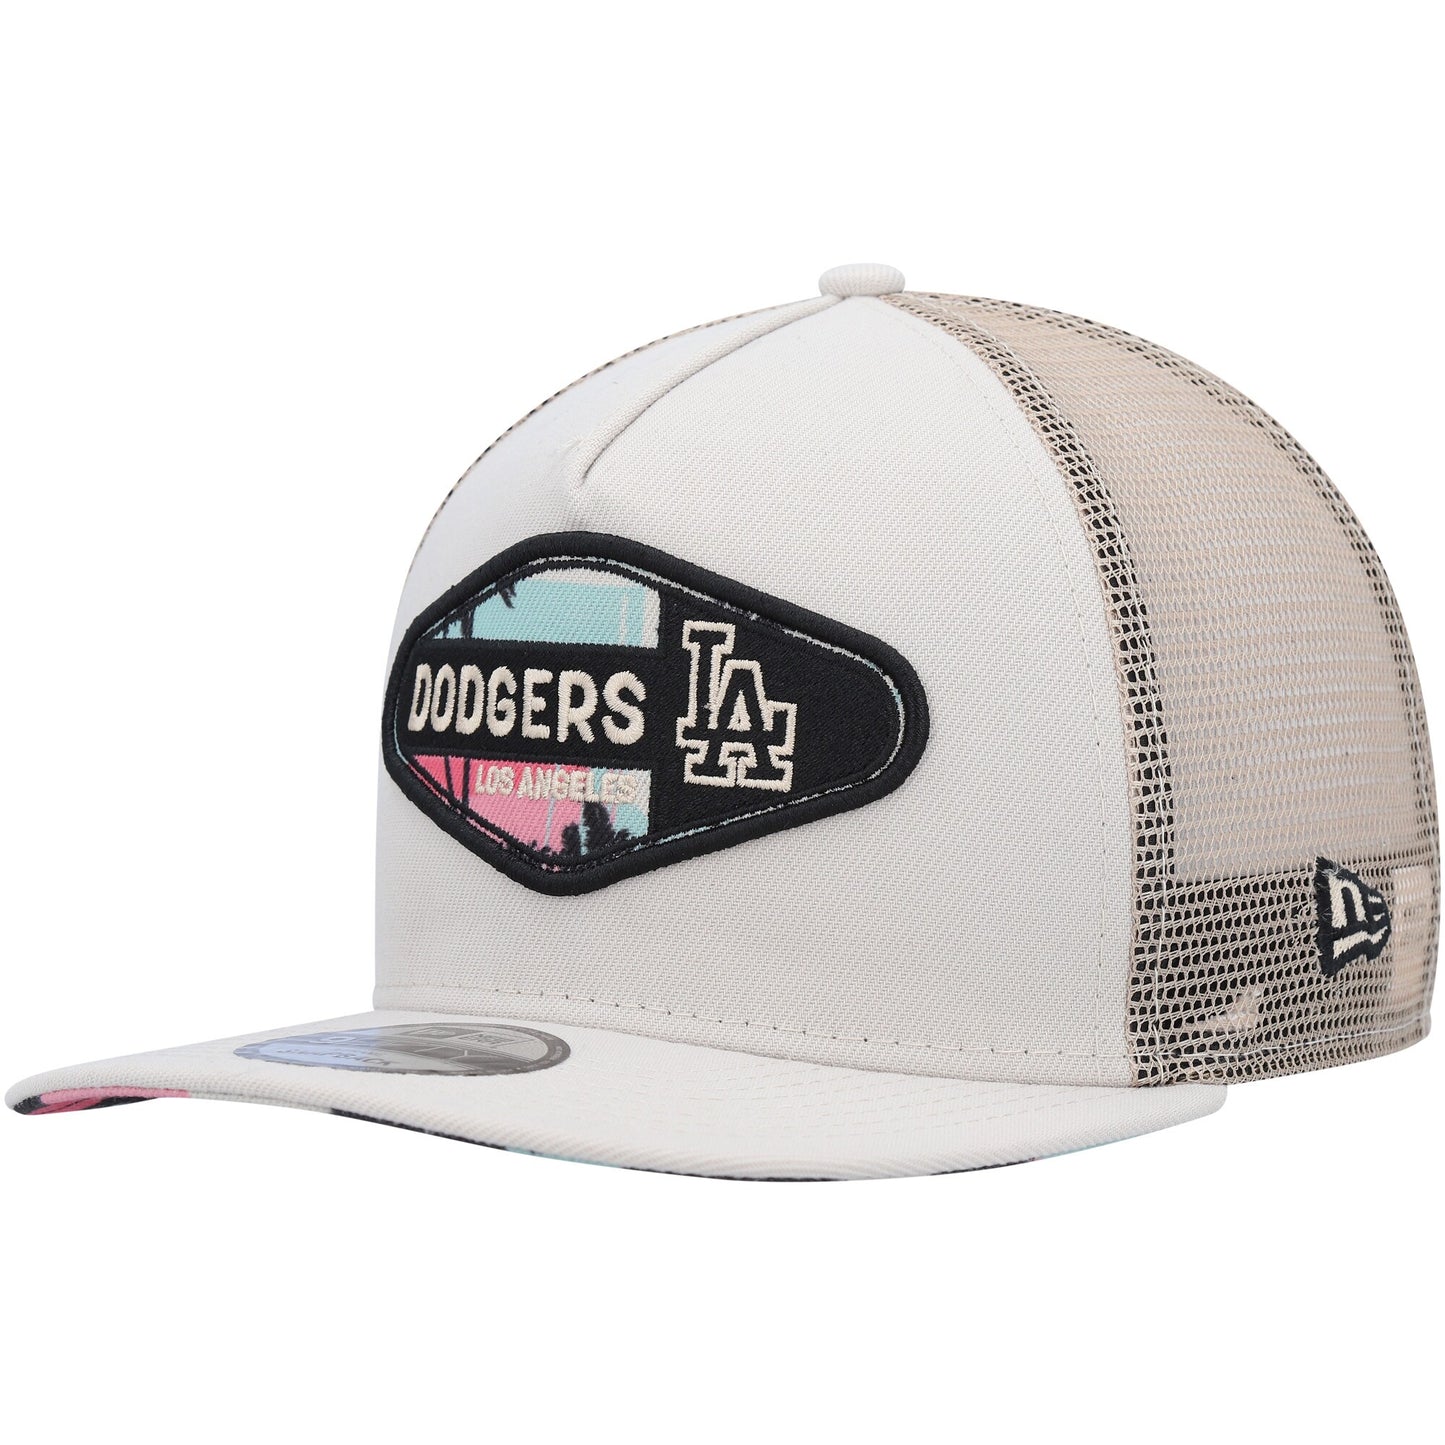 Los Angeles Dodgers New Era Retro Beachin' Patch A-Frame Trucker 9FIFTY Snapback Hat - Natural